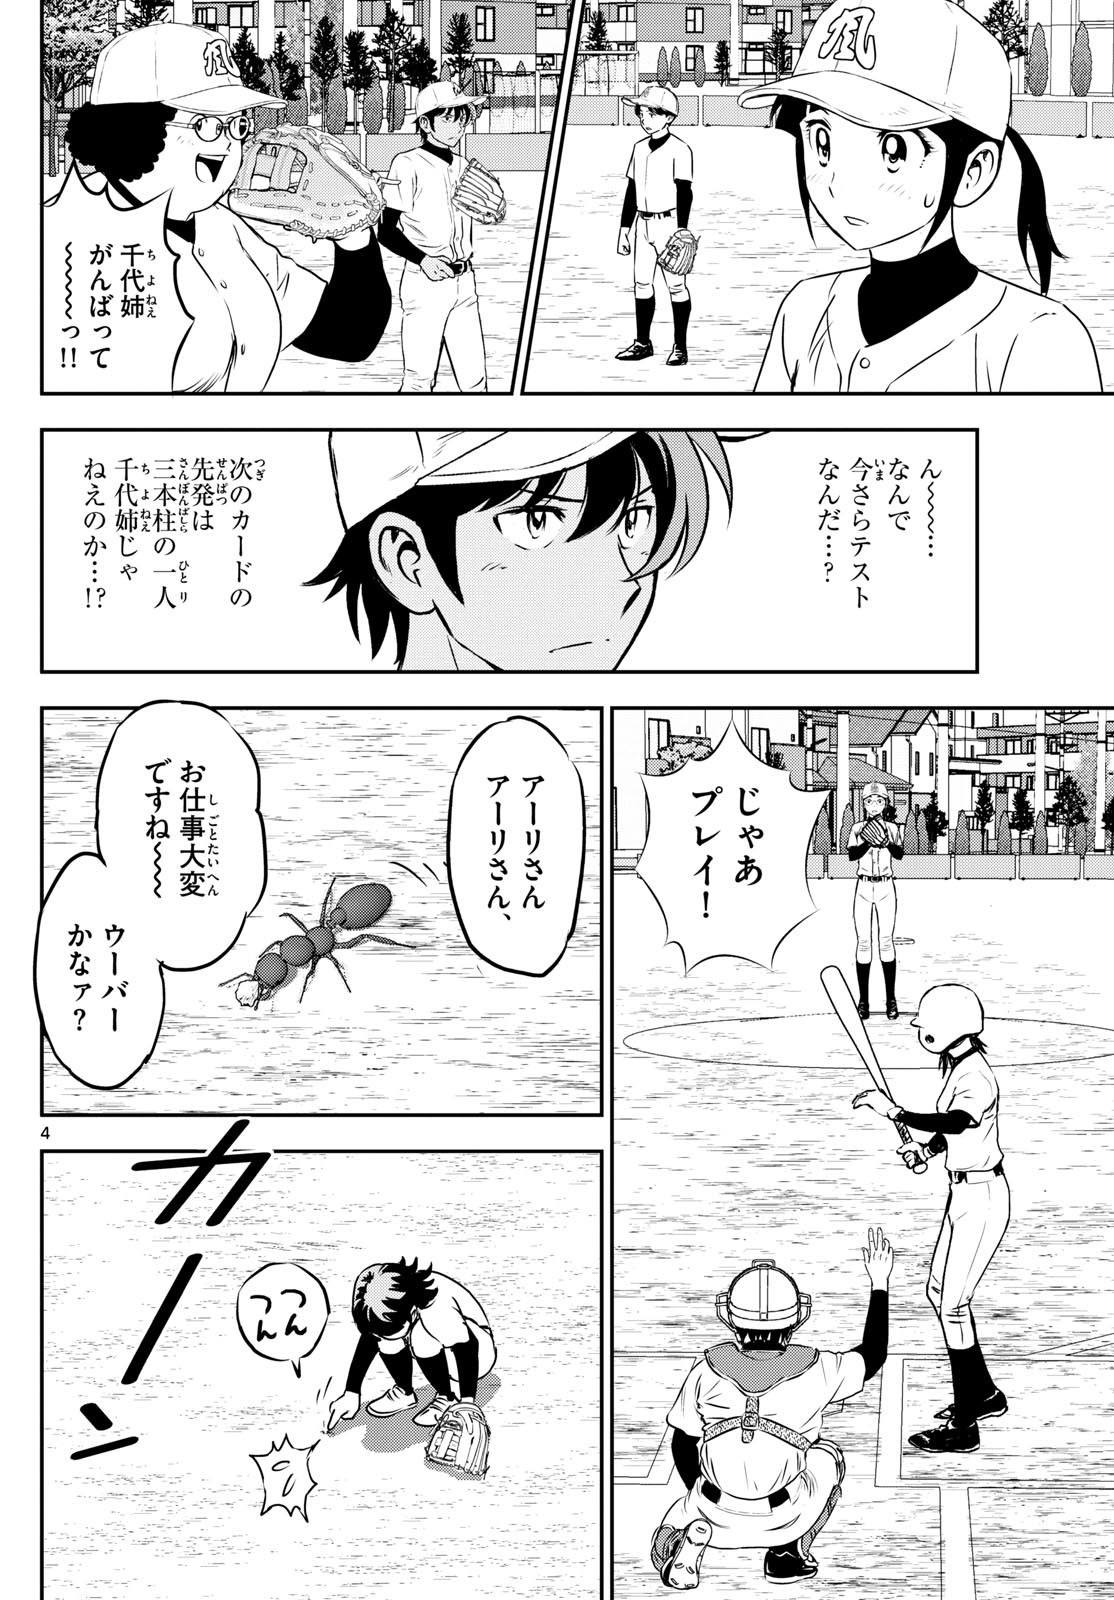 Major 2nd - メジャーセカンド - Chapter 280 - Page 4